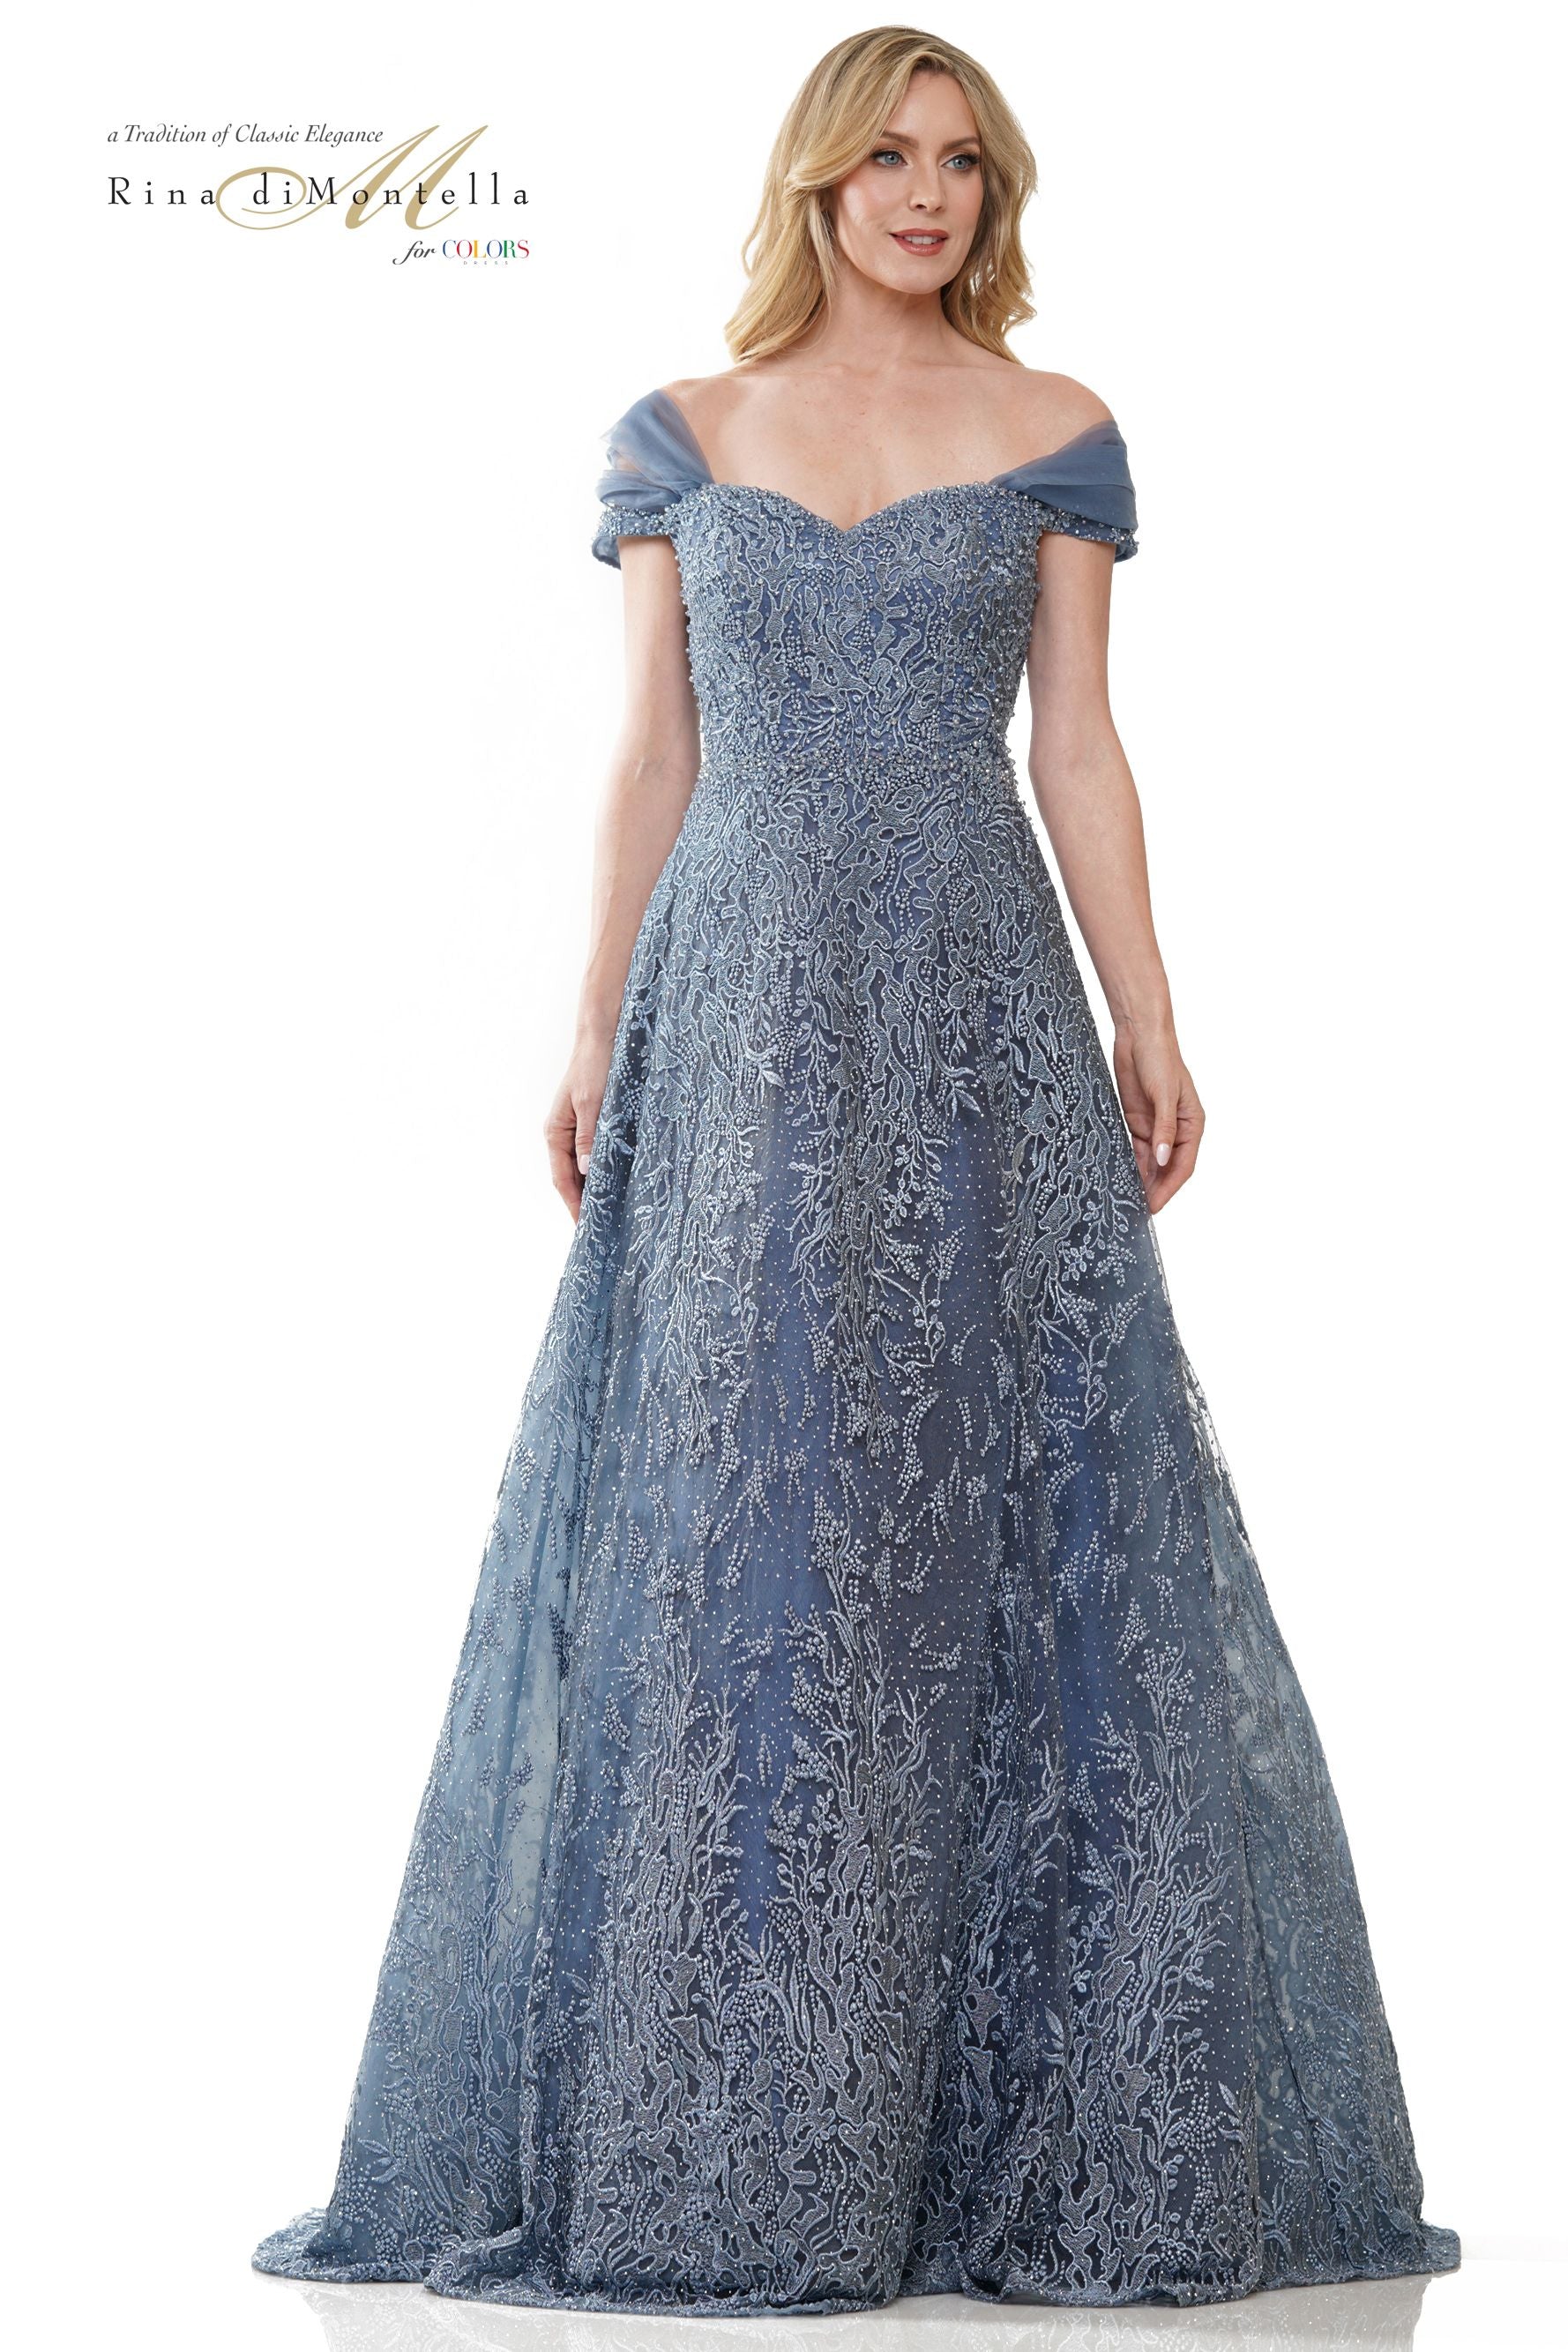 Rina Di Montella Embroidery Sweetheart A-Line Long Gown -RD2902